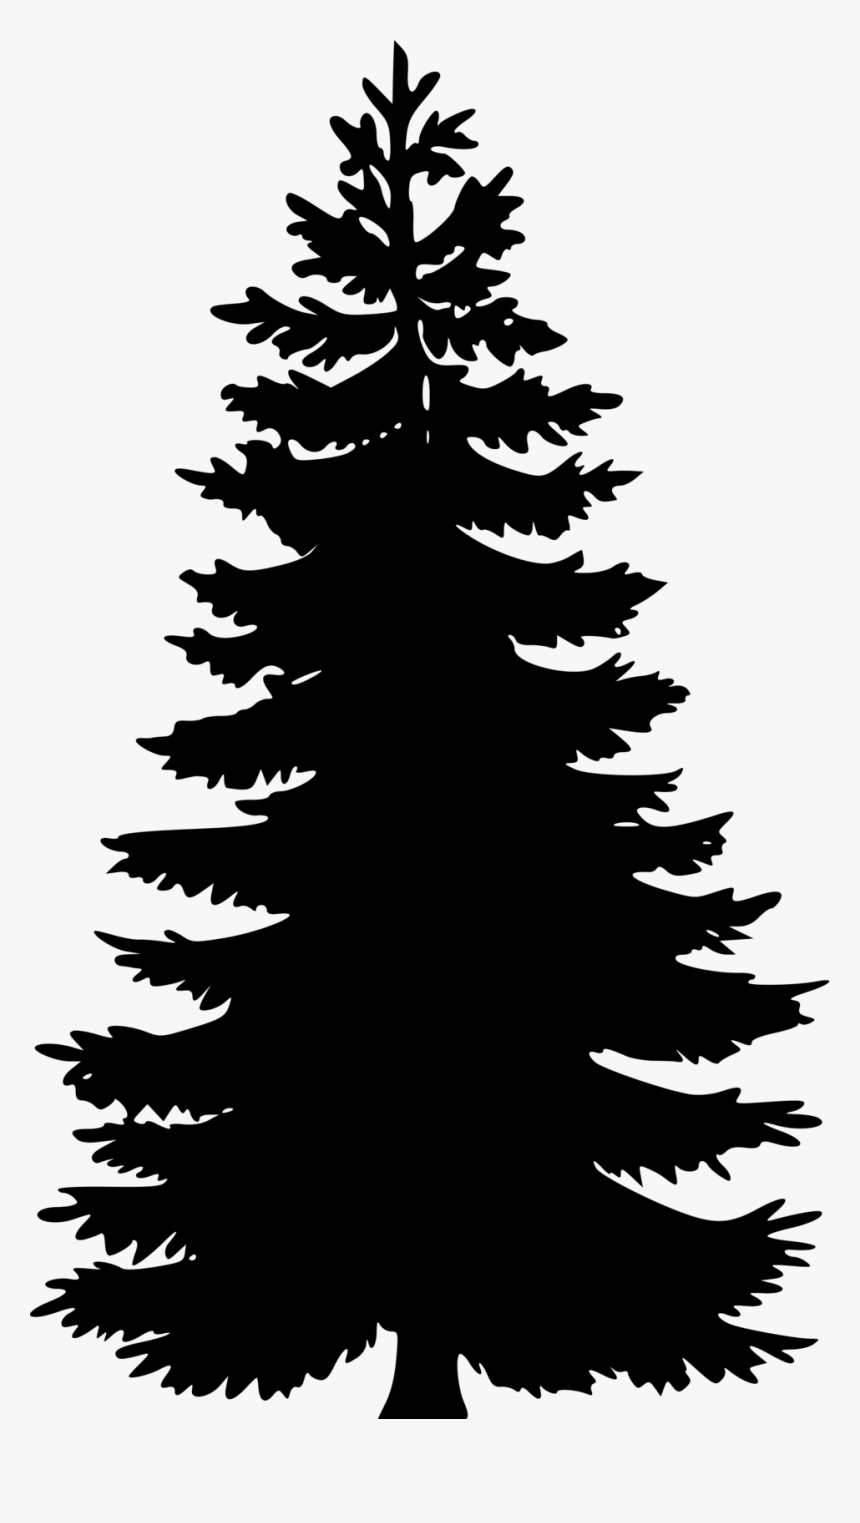 Tree - Pine Tree Vector Png, Transparent Png, Free Download